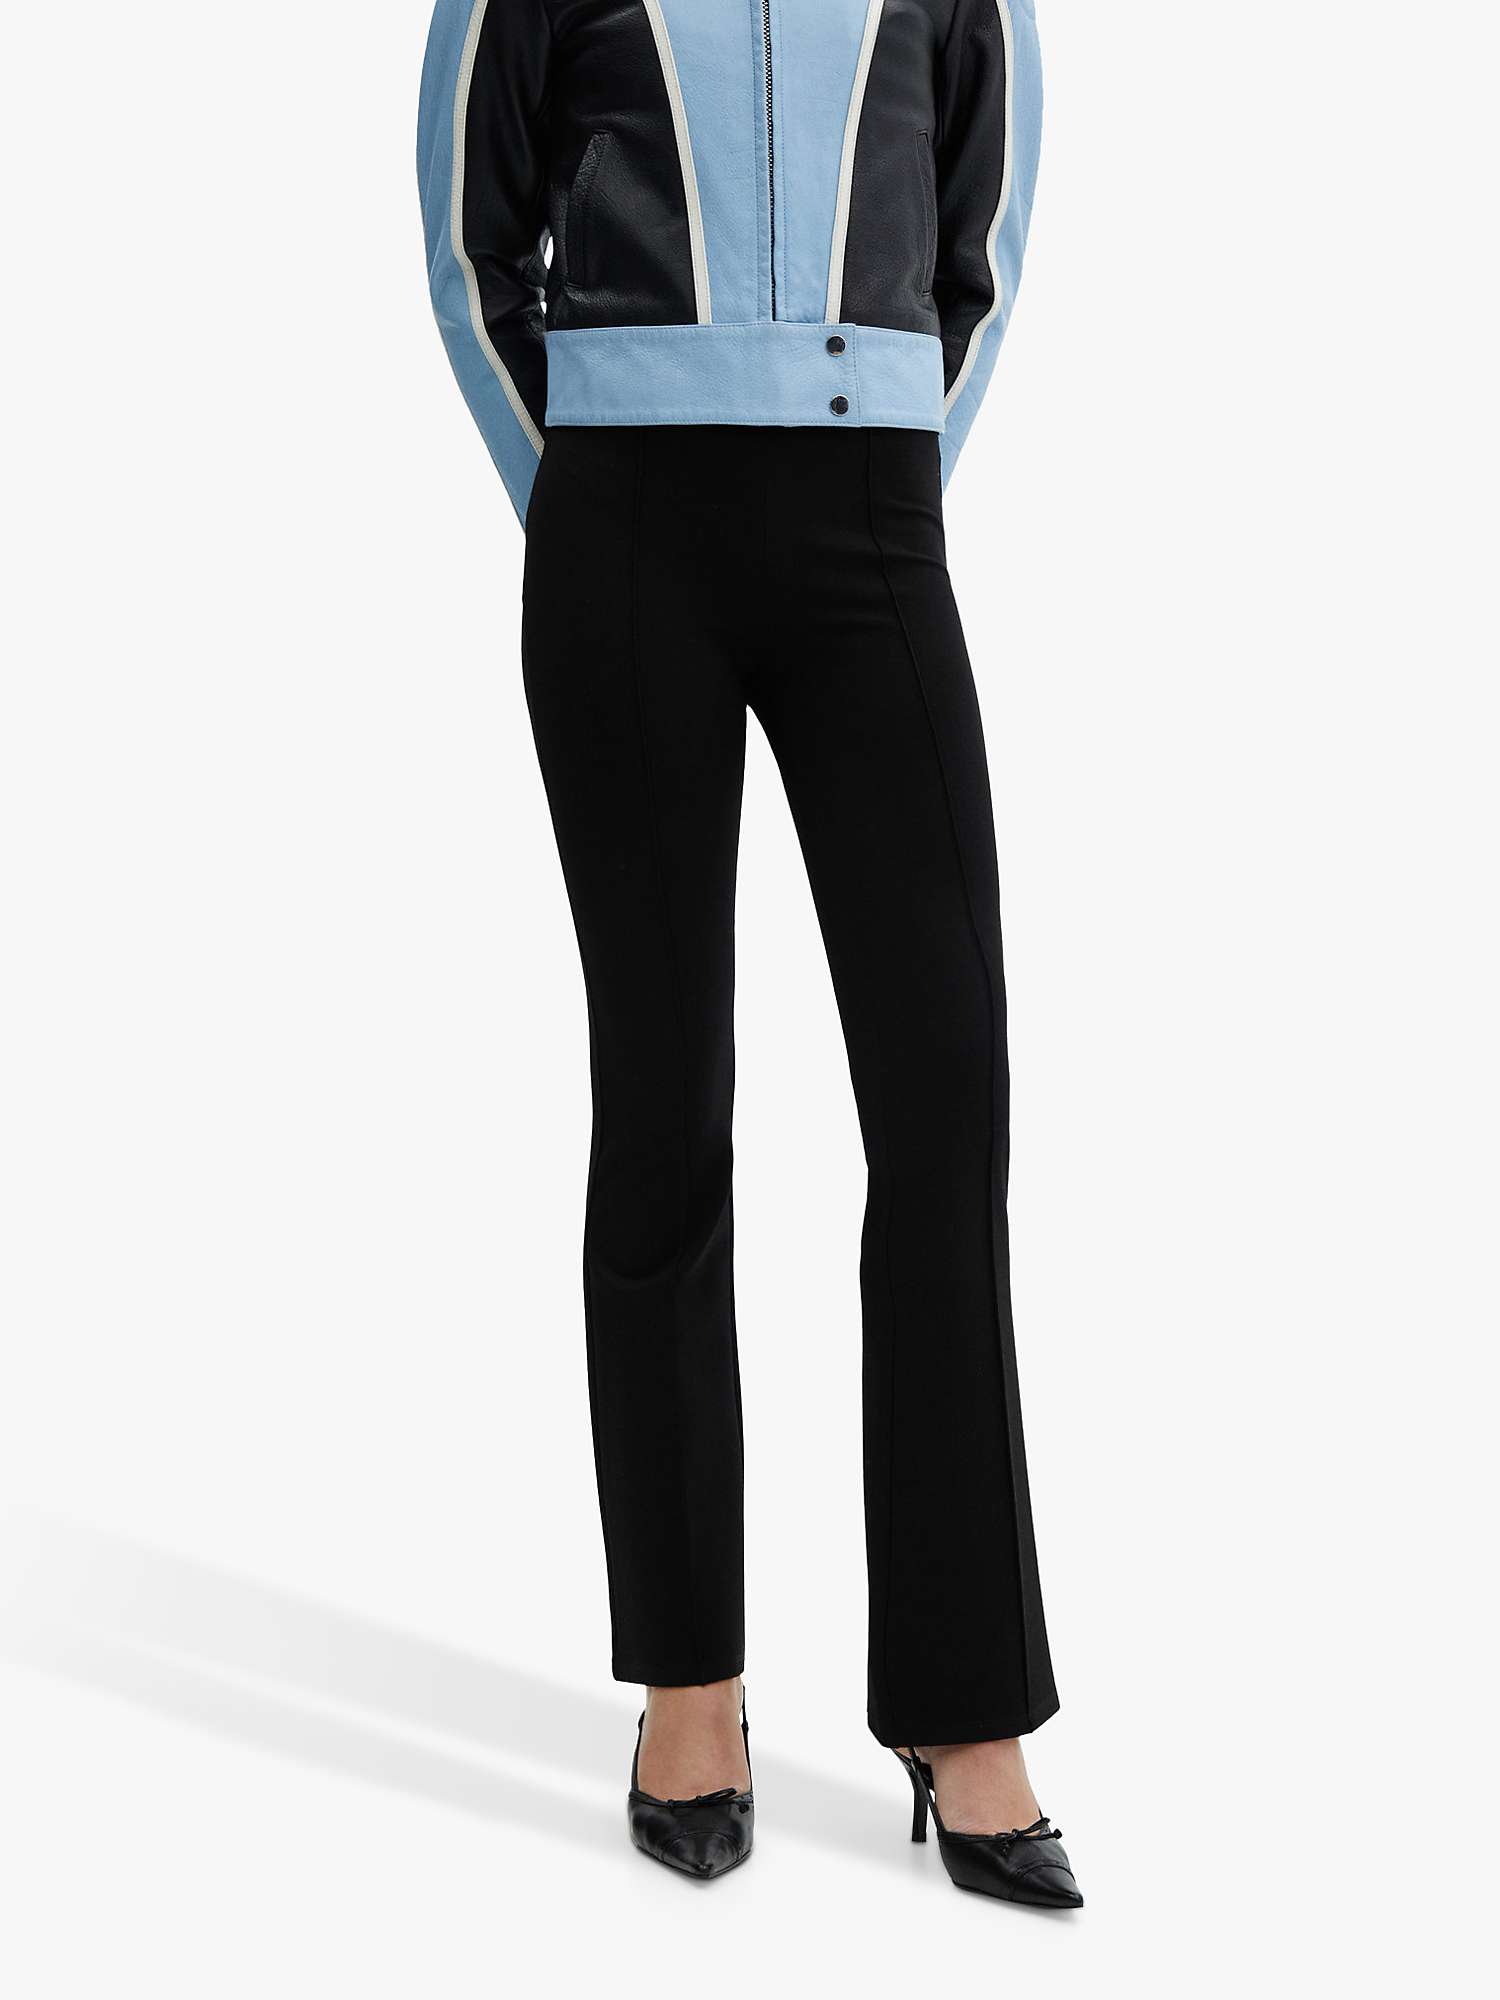 Buy Mango Delfin Pull-On Bootcut Trousers, Black Online at johnlewis.com